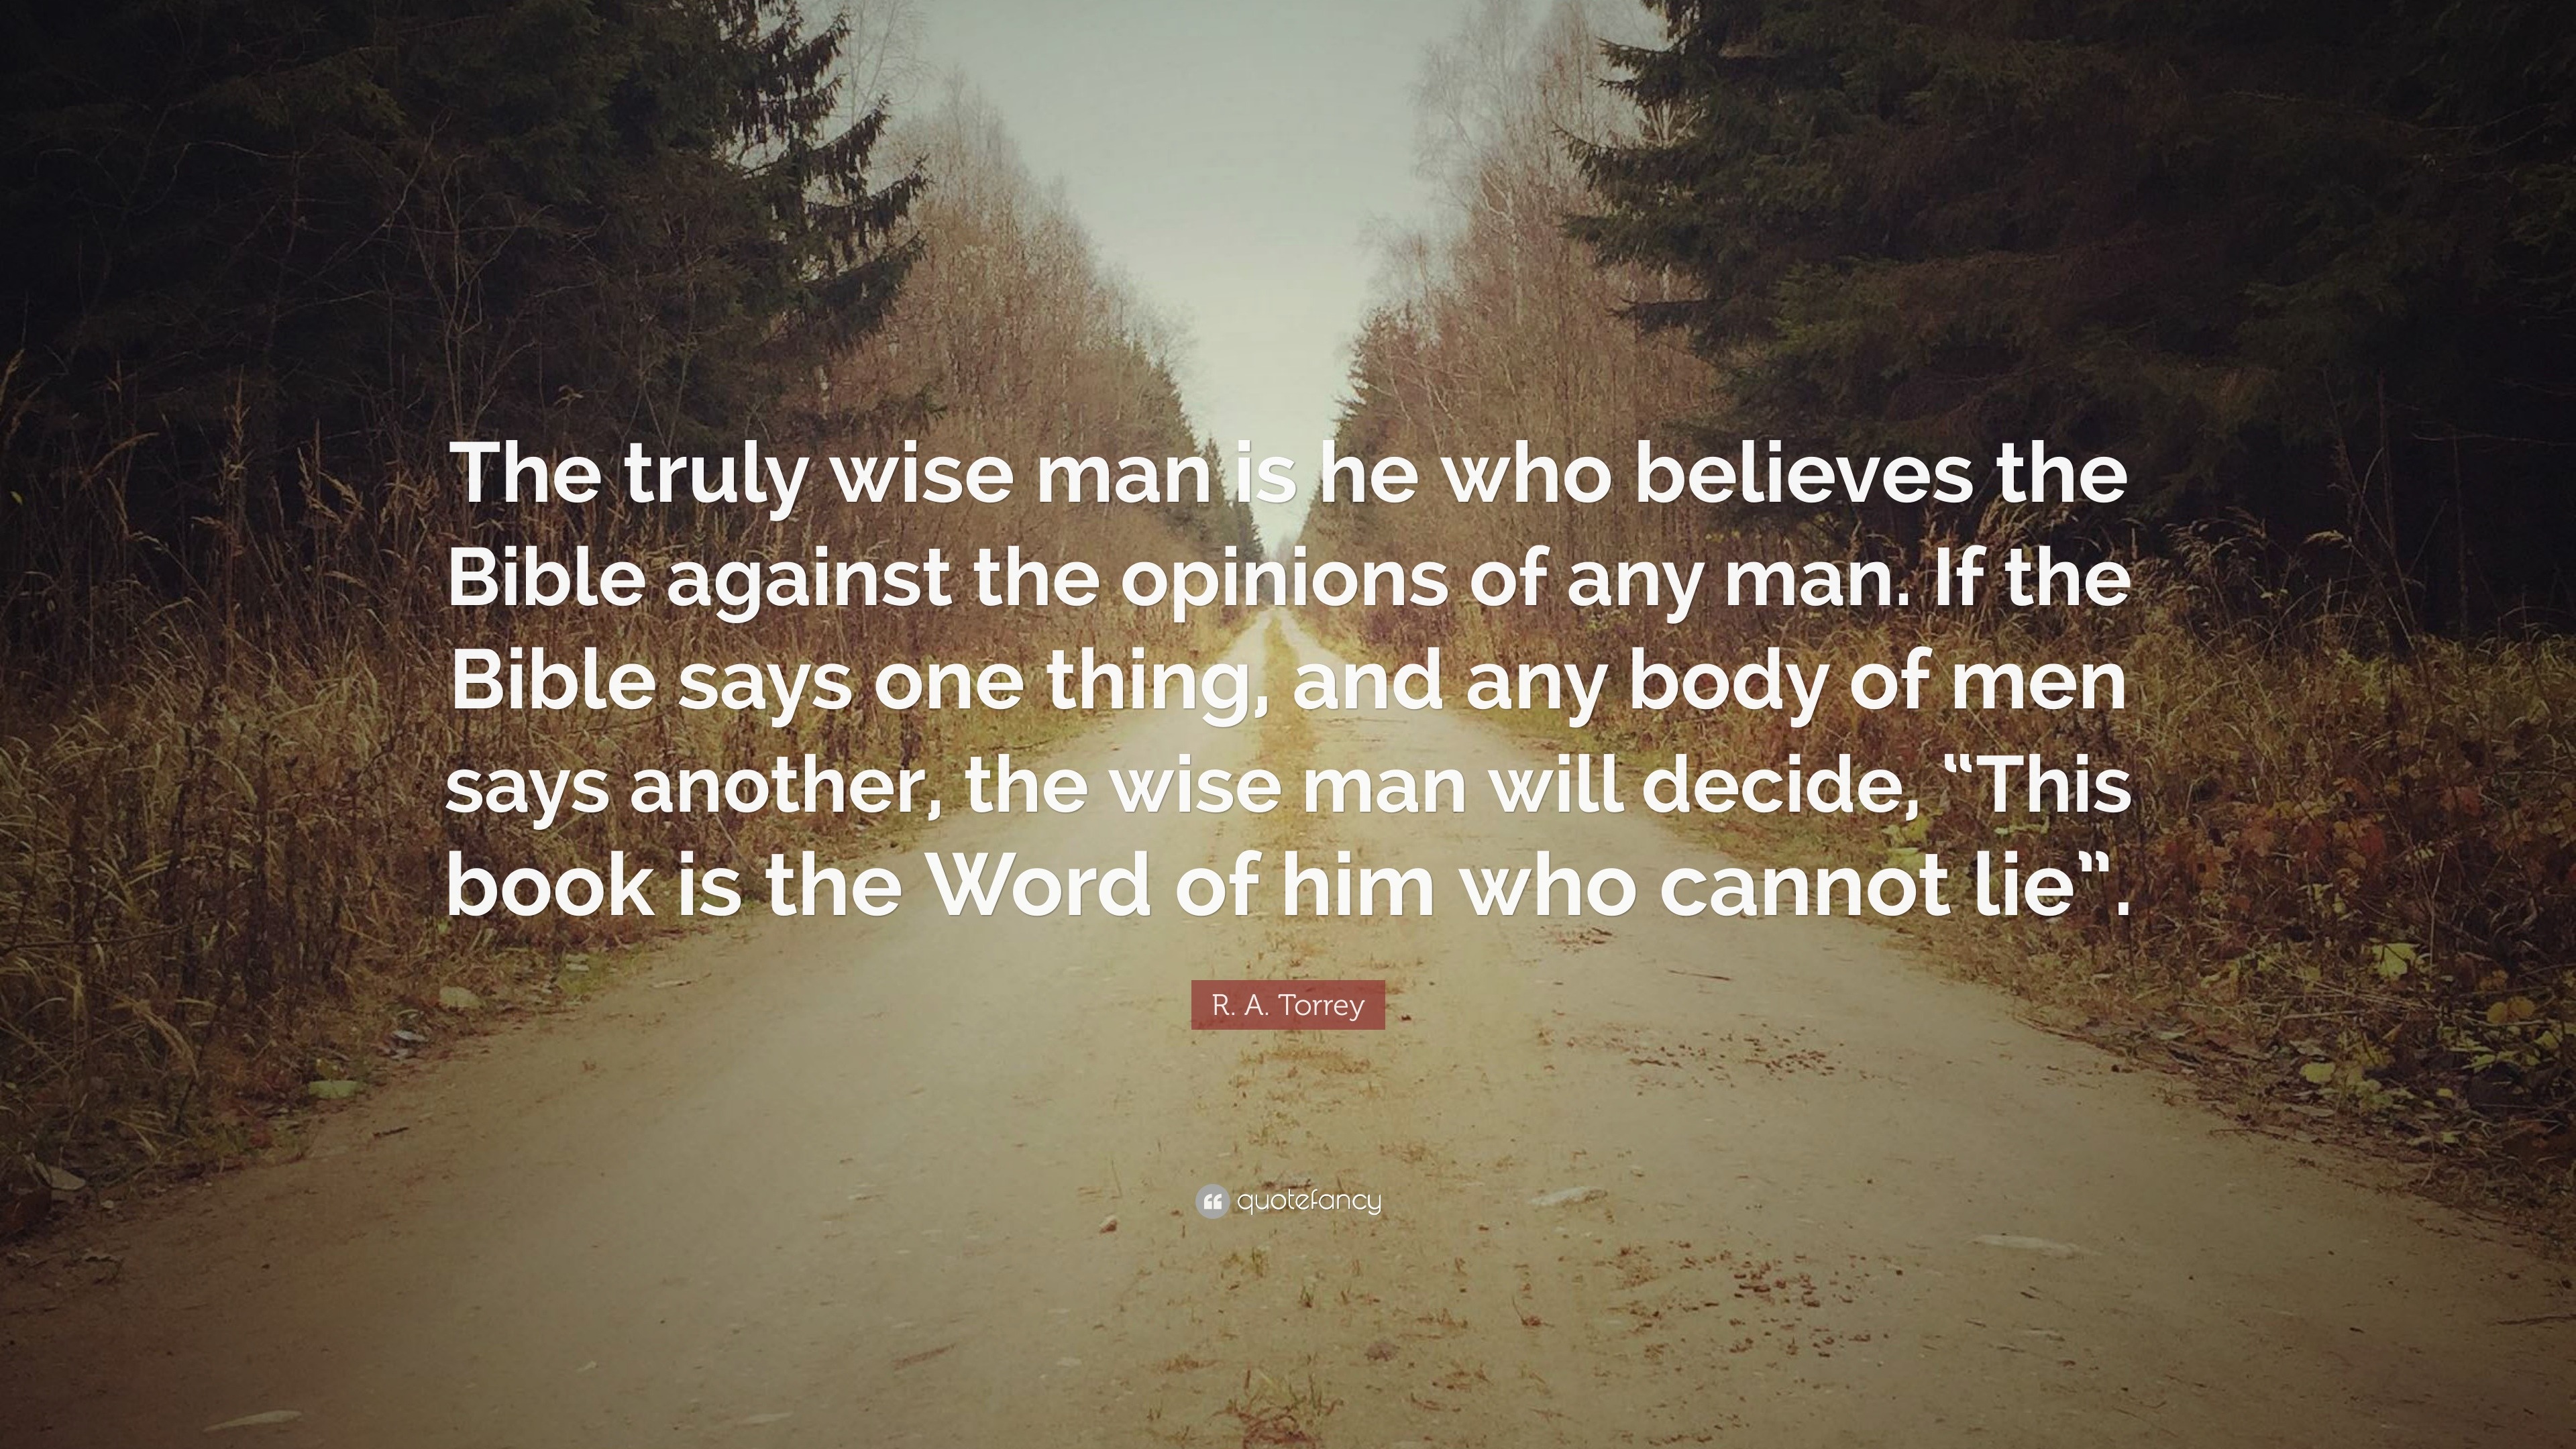 1194778 R A Torrey Quote The truly wise man is he who believes the Bible